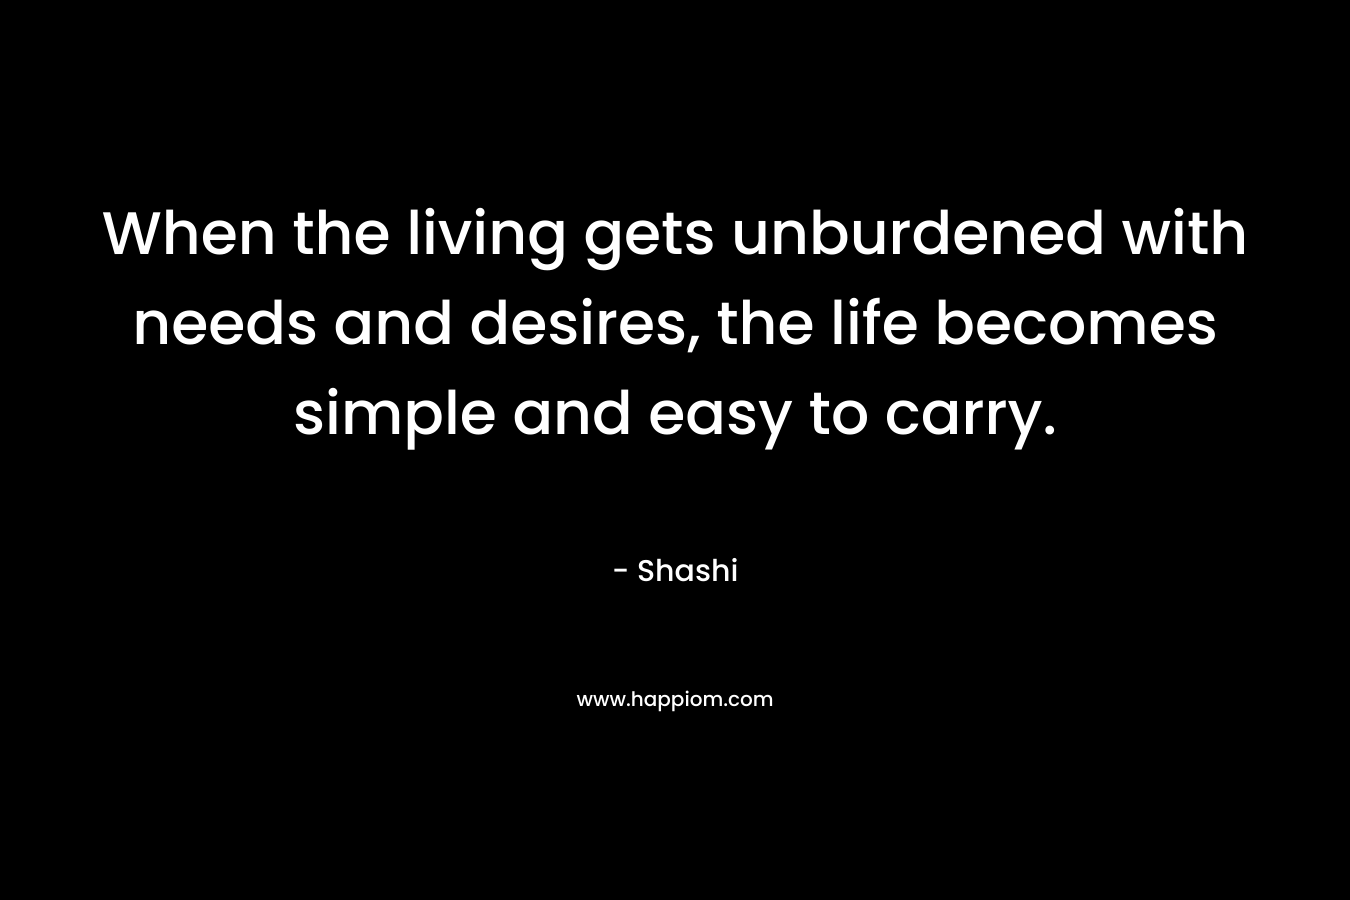 When the living gets unburdened with needs and desires, the life becomes simple and easy to carry. – Shashi